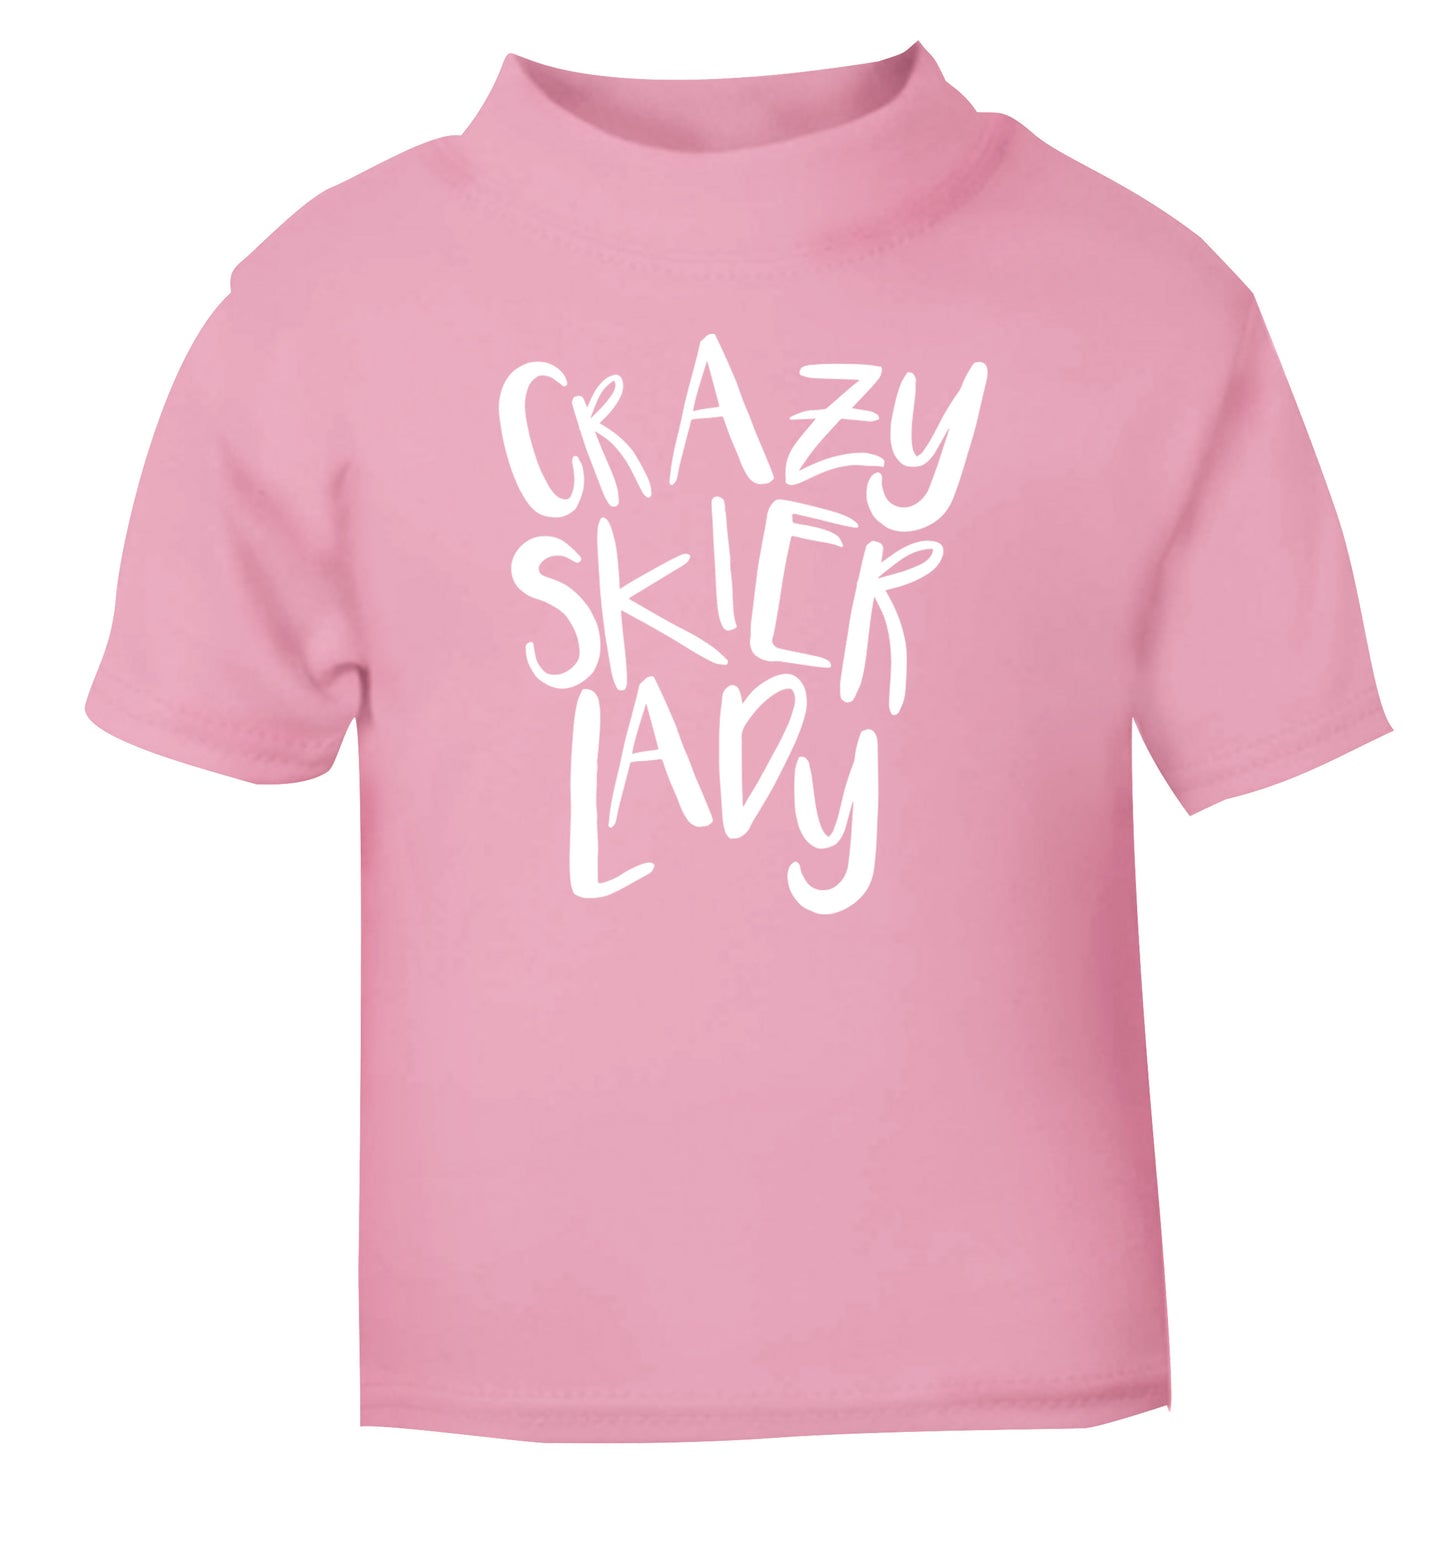 Crazy skier lady light pink Baby Toddler Tshirt 2 Years